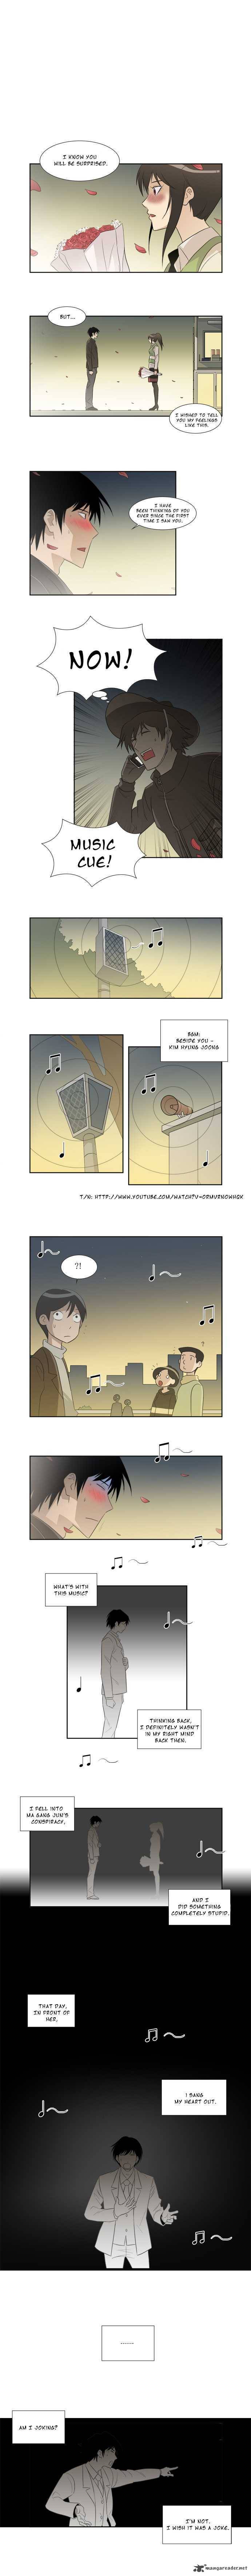 Melo Holic Chapter 9 Page 4